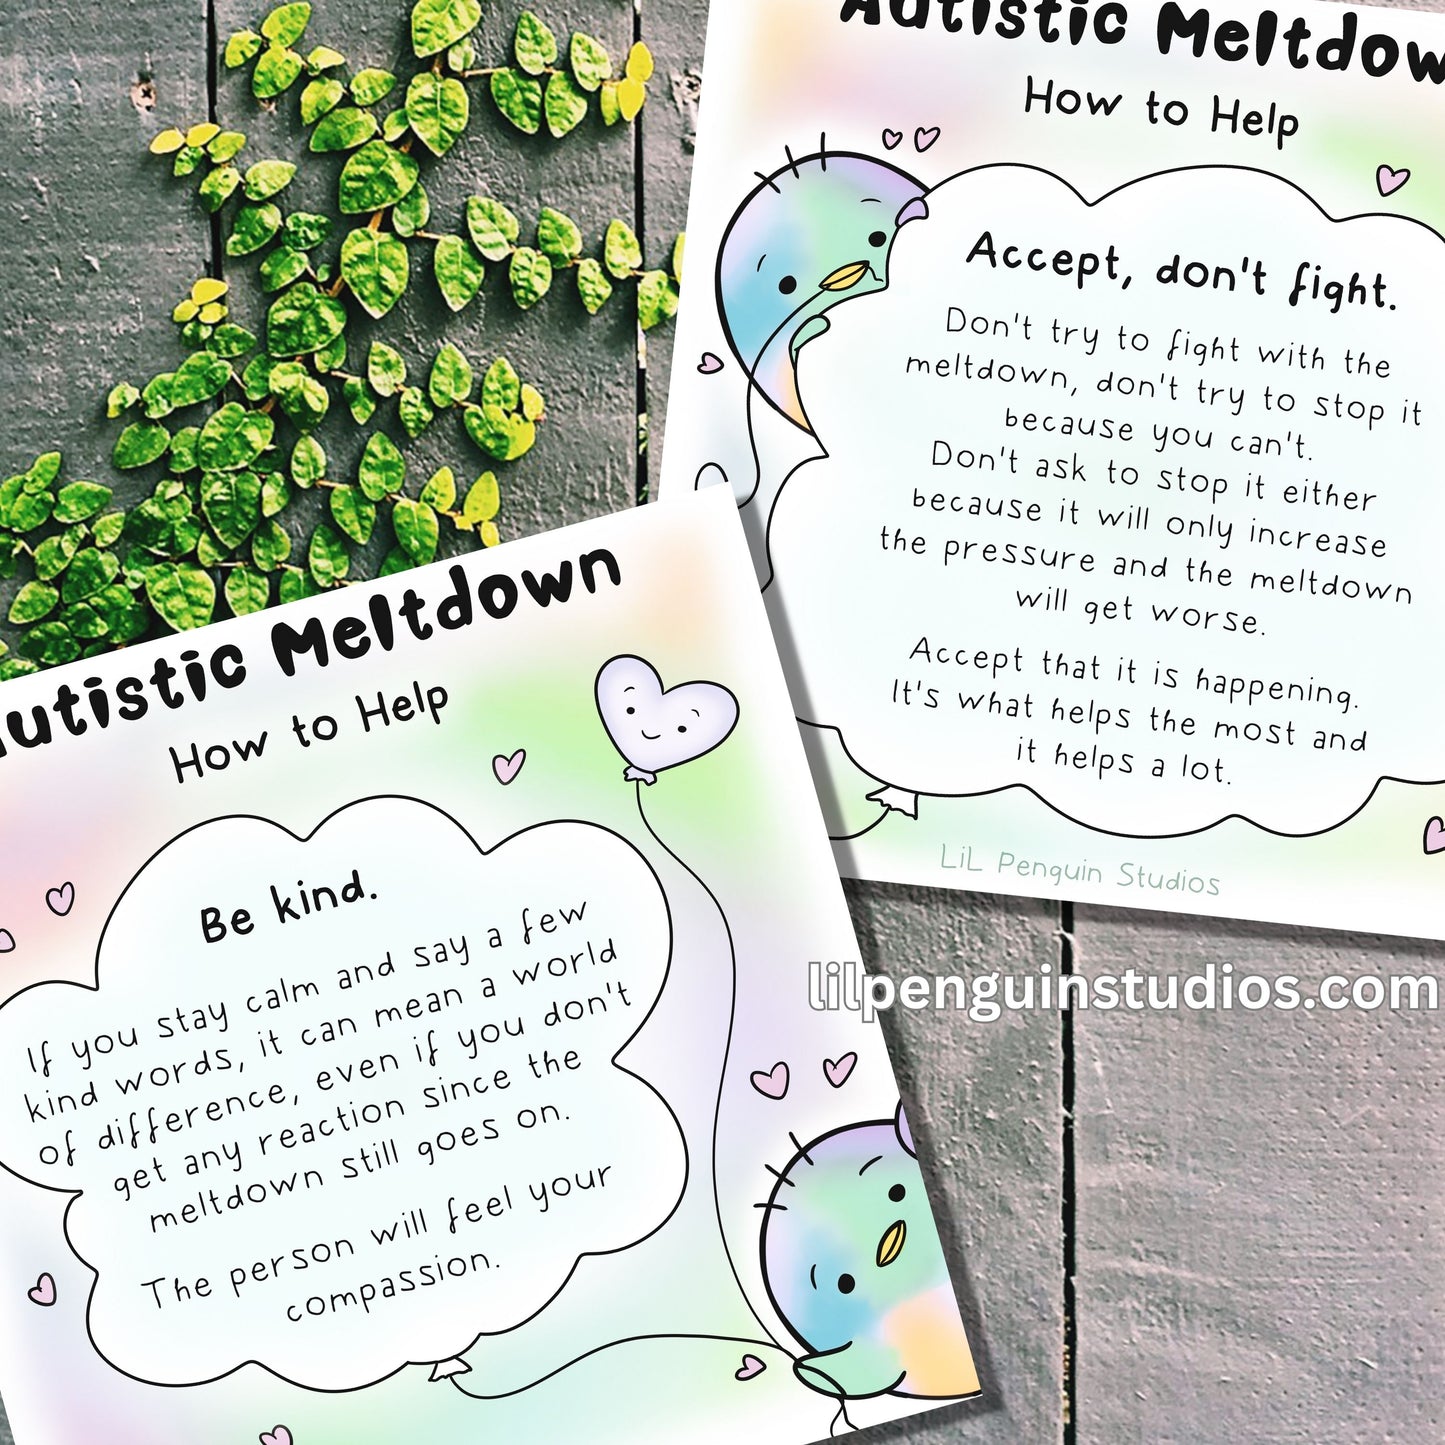 Autistic Meltdown, How to Help printable bundle with 2 worksheets.